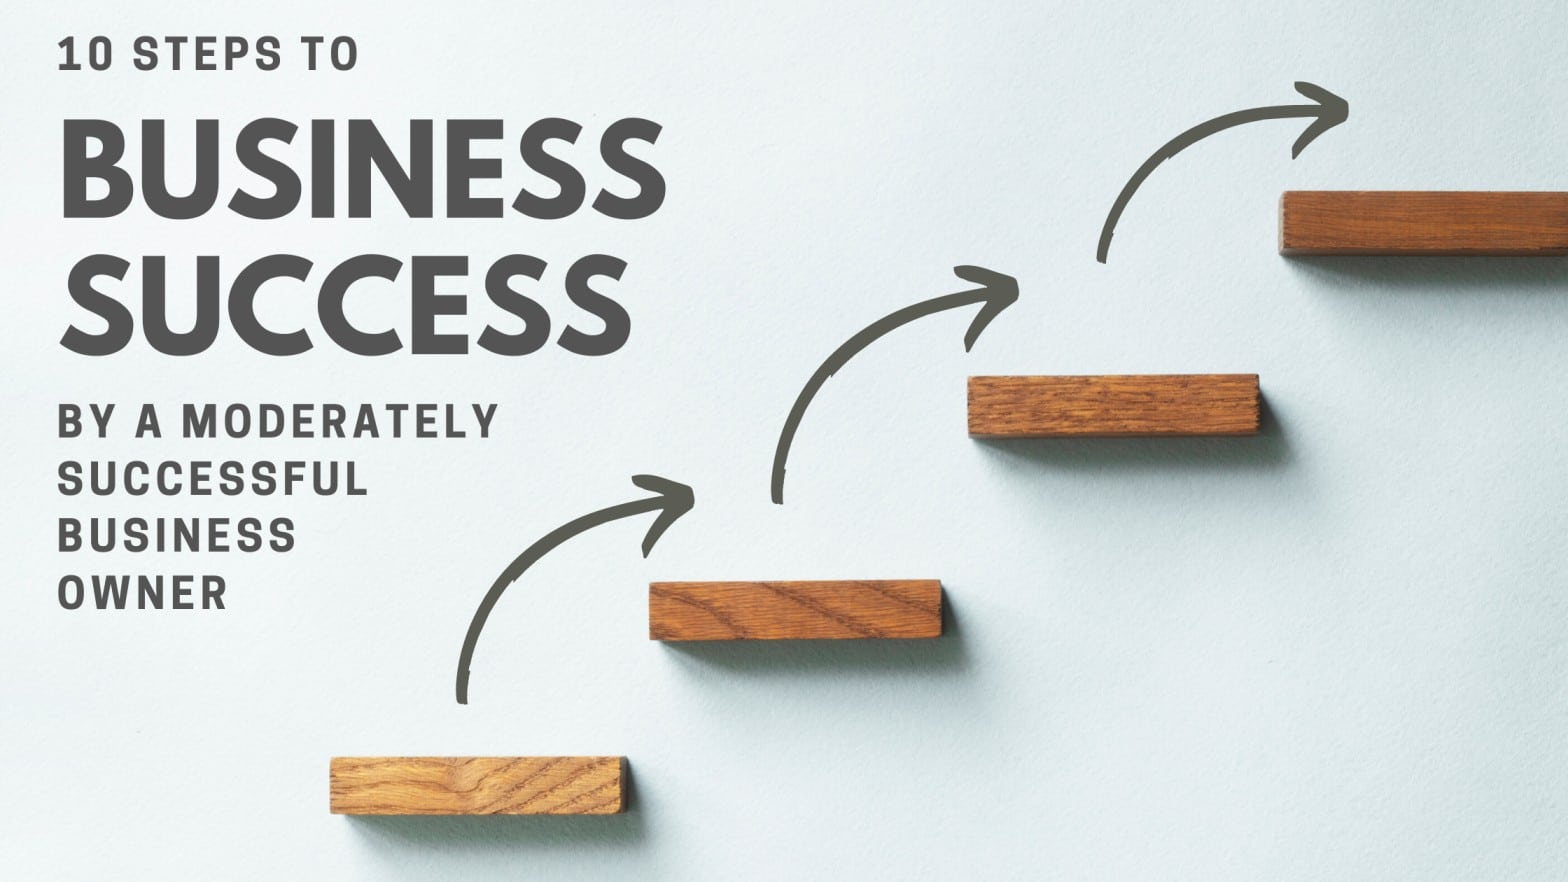 Steps to Business Success